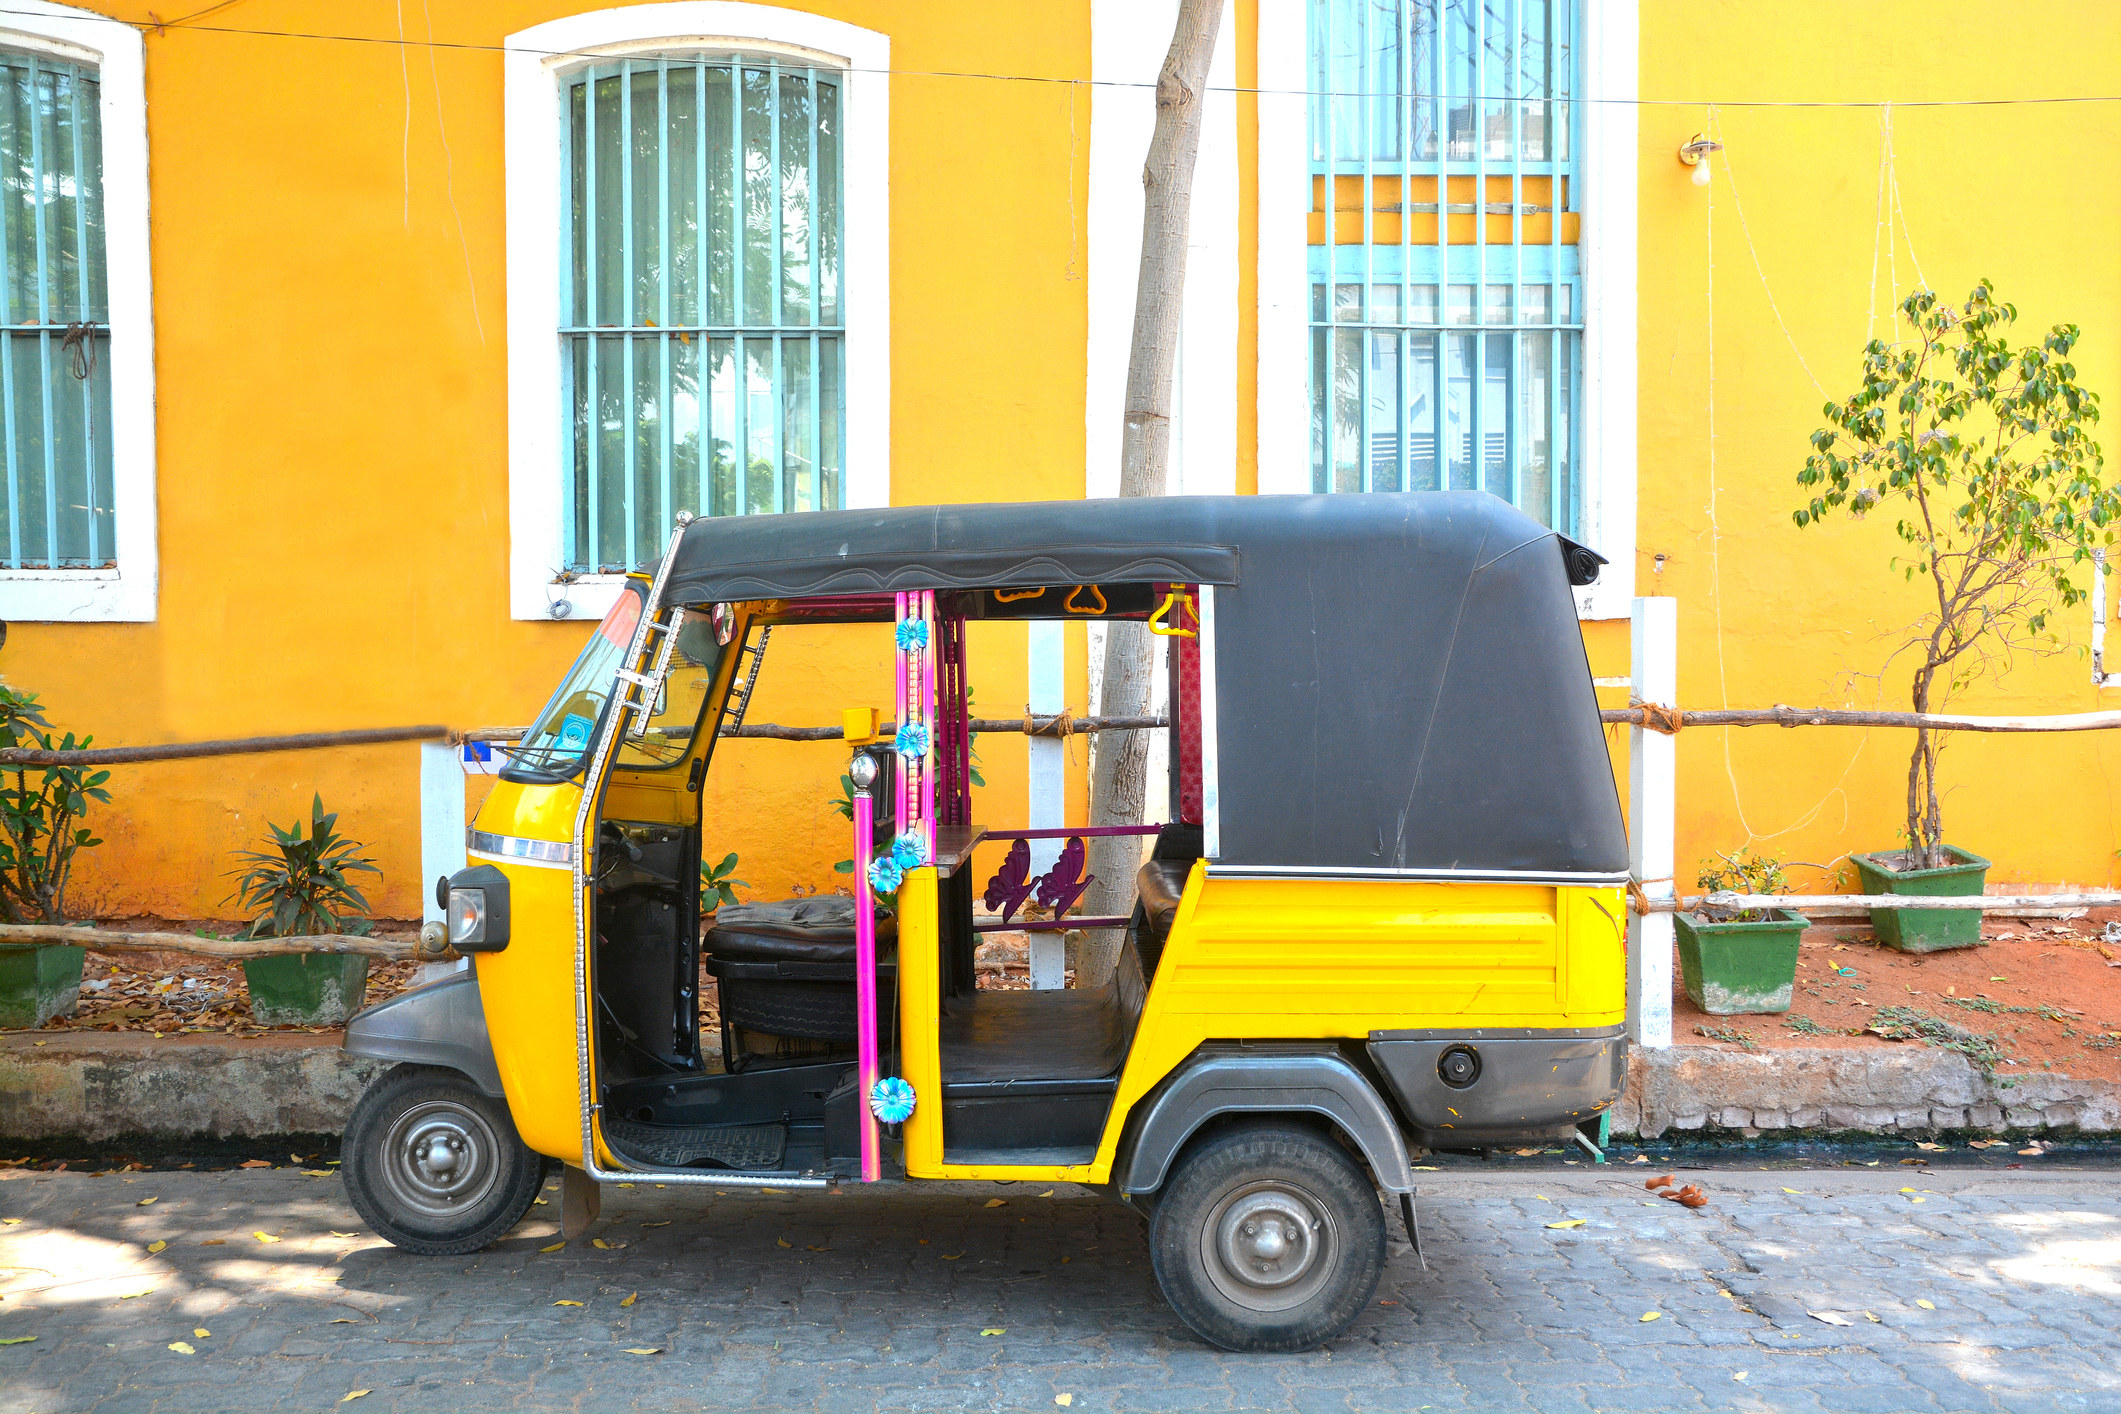 A car parked outside a yellow building.